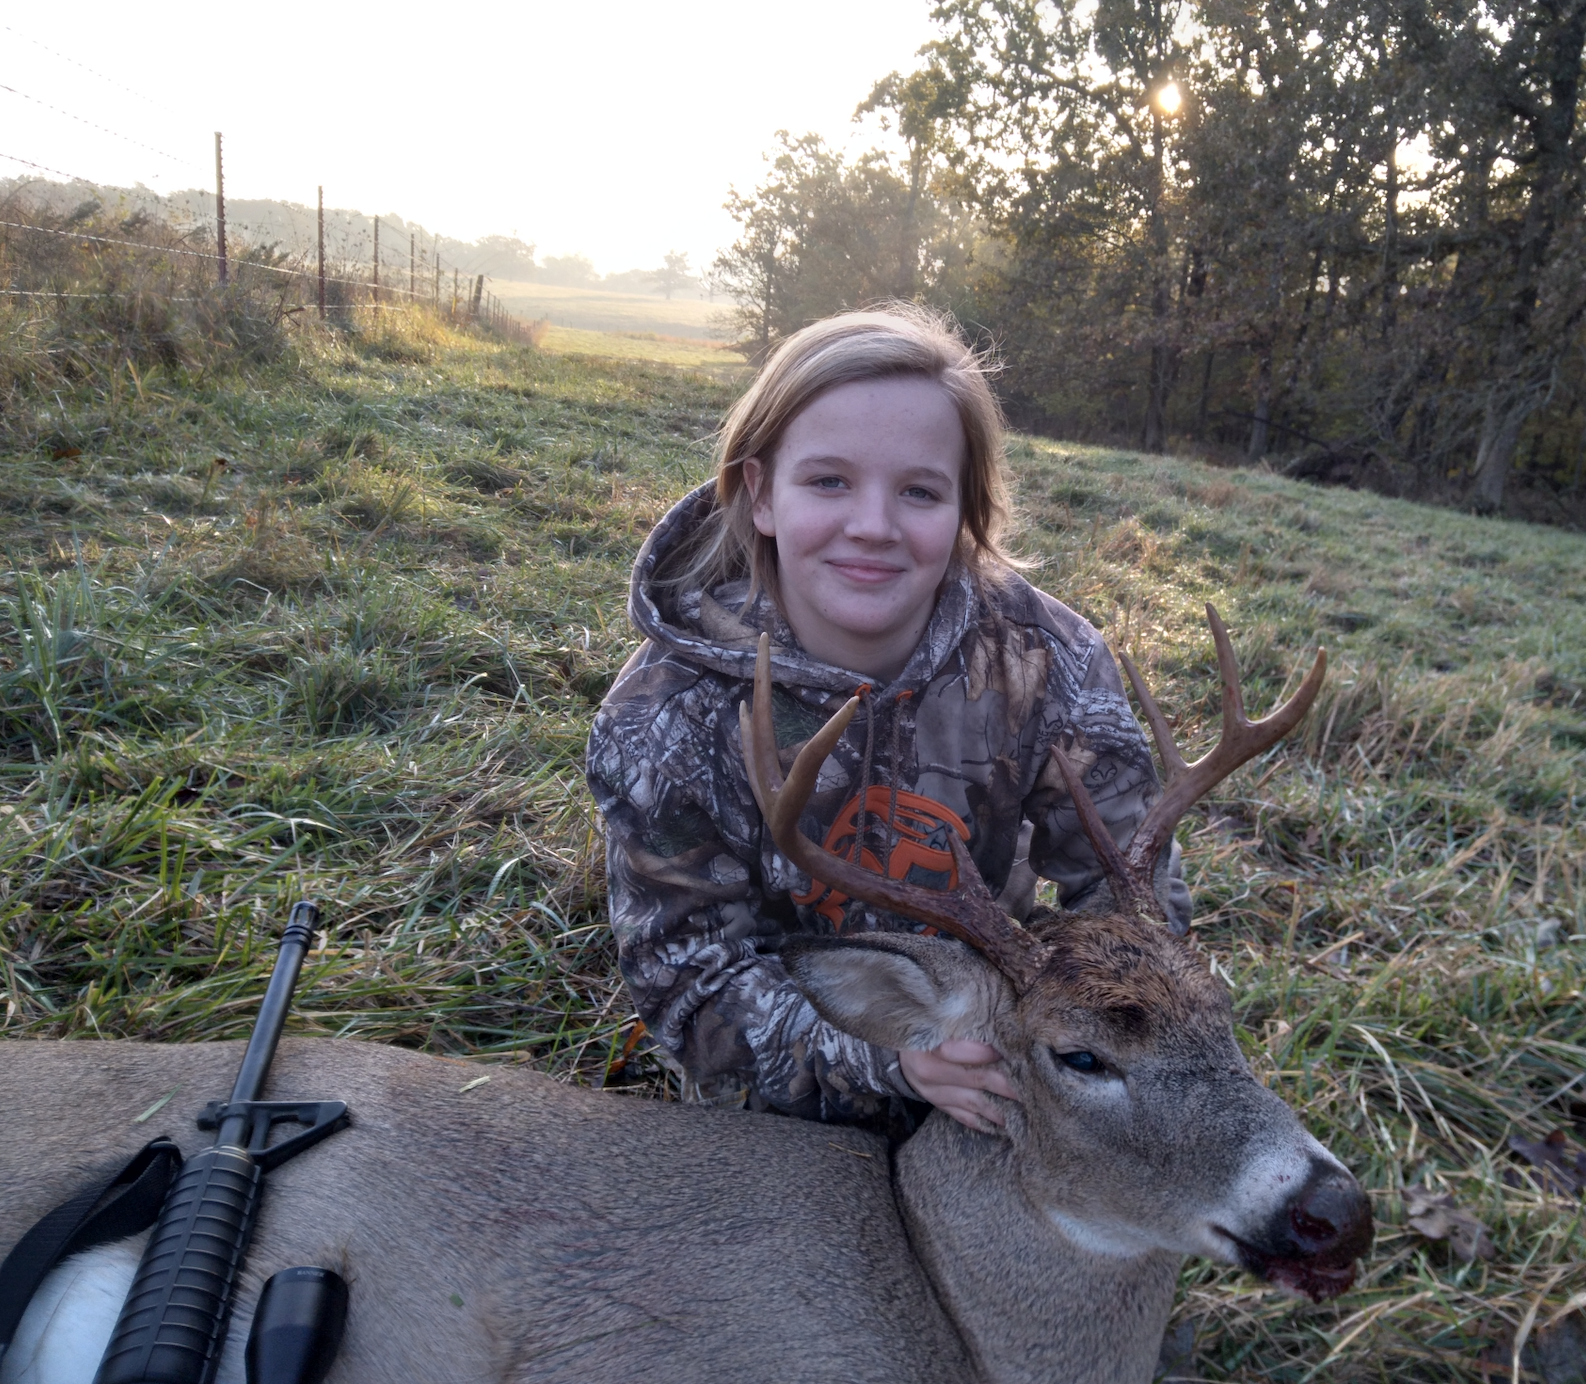 The youngest Gulick daughter shot an 8-point buck that morning